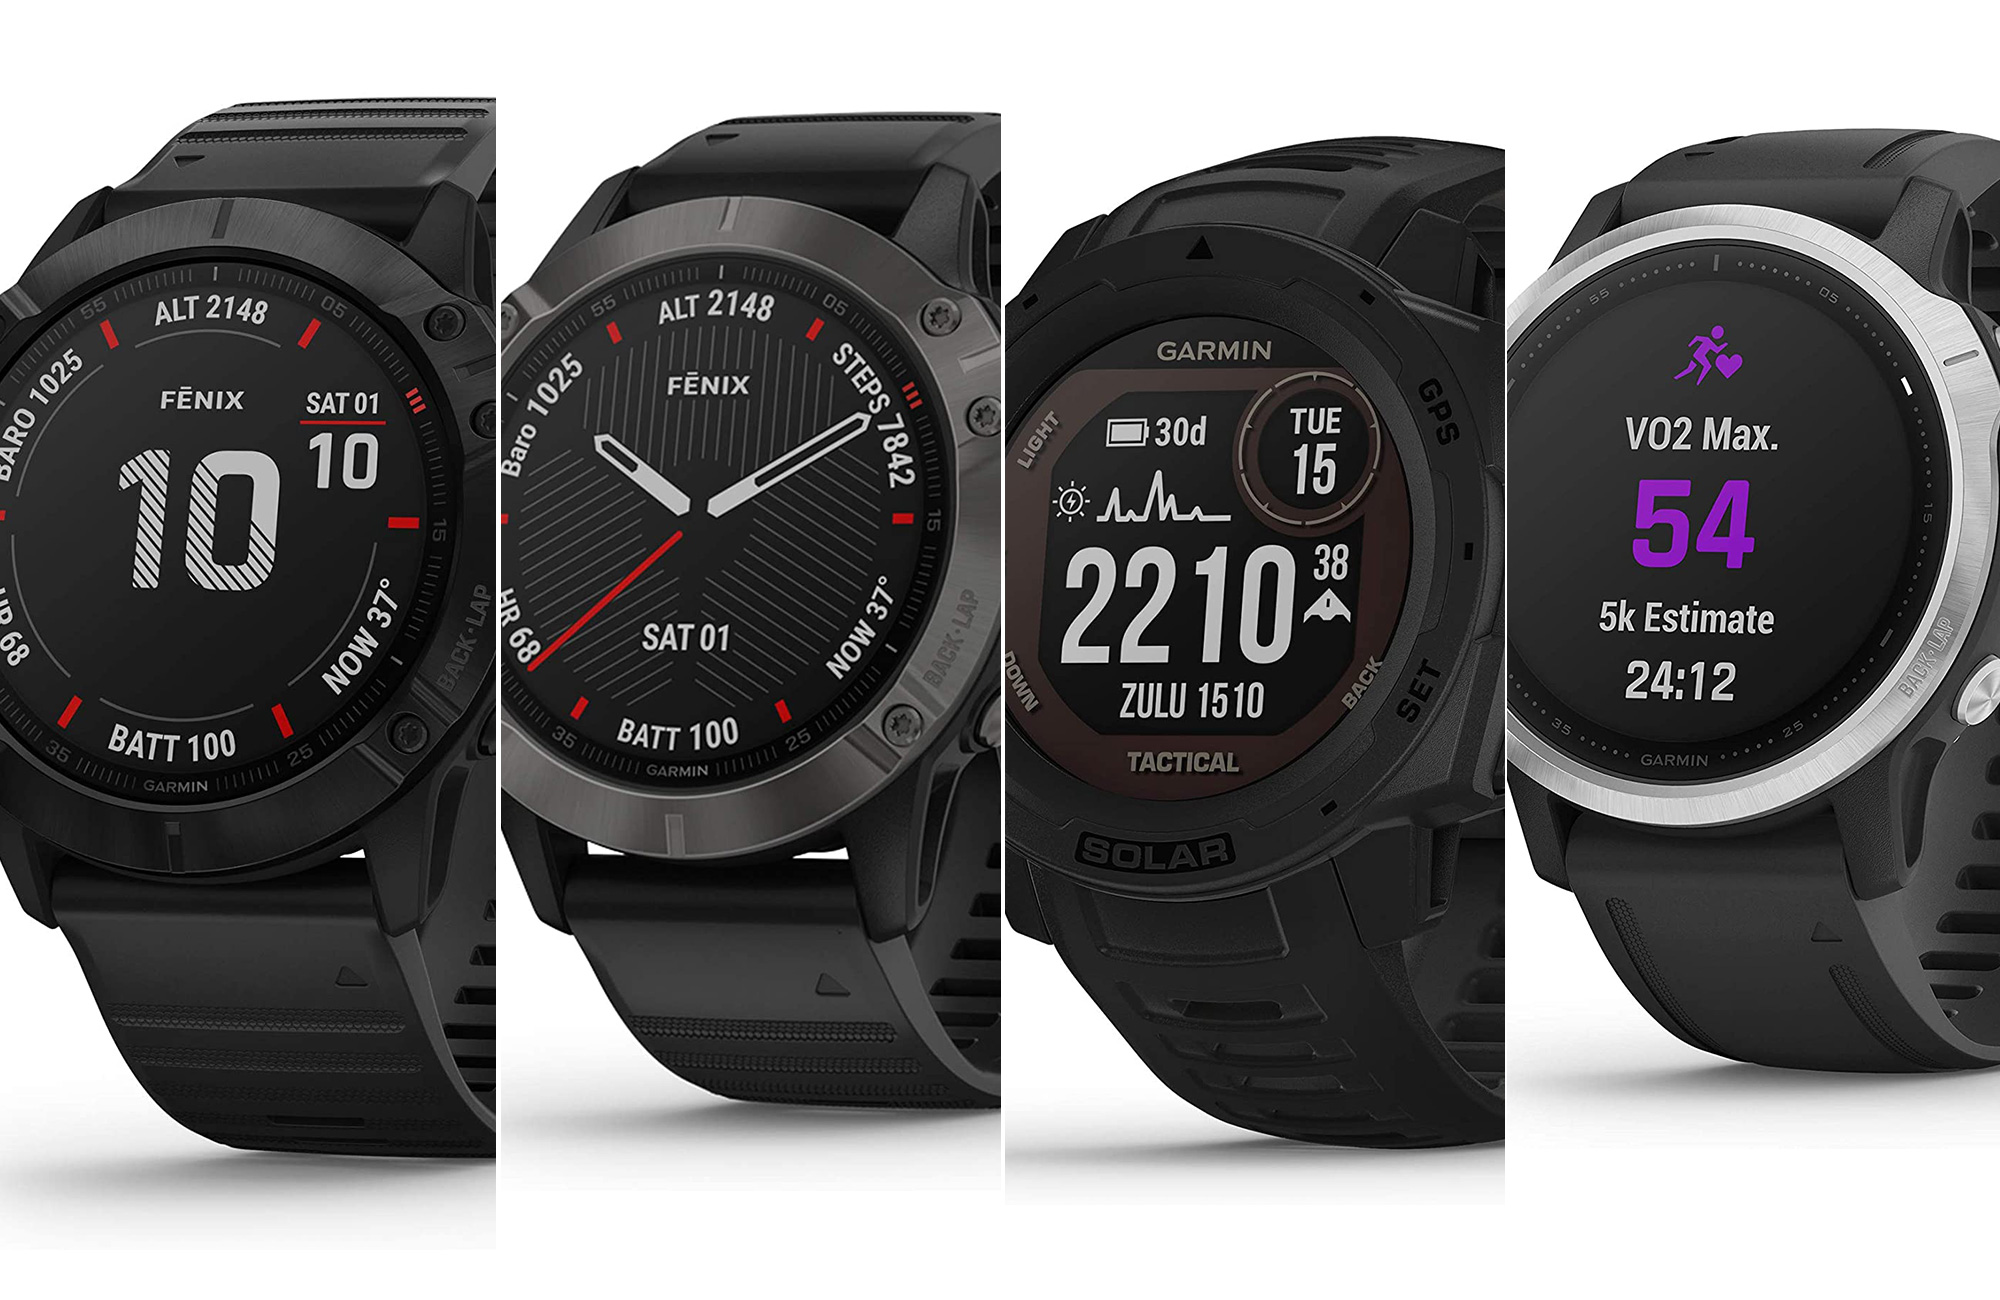 Get up to $200 off Garmin Smartwatches at Amazon’s Black Friday sale